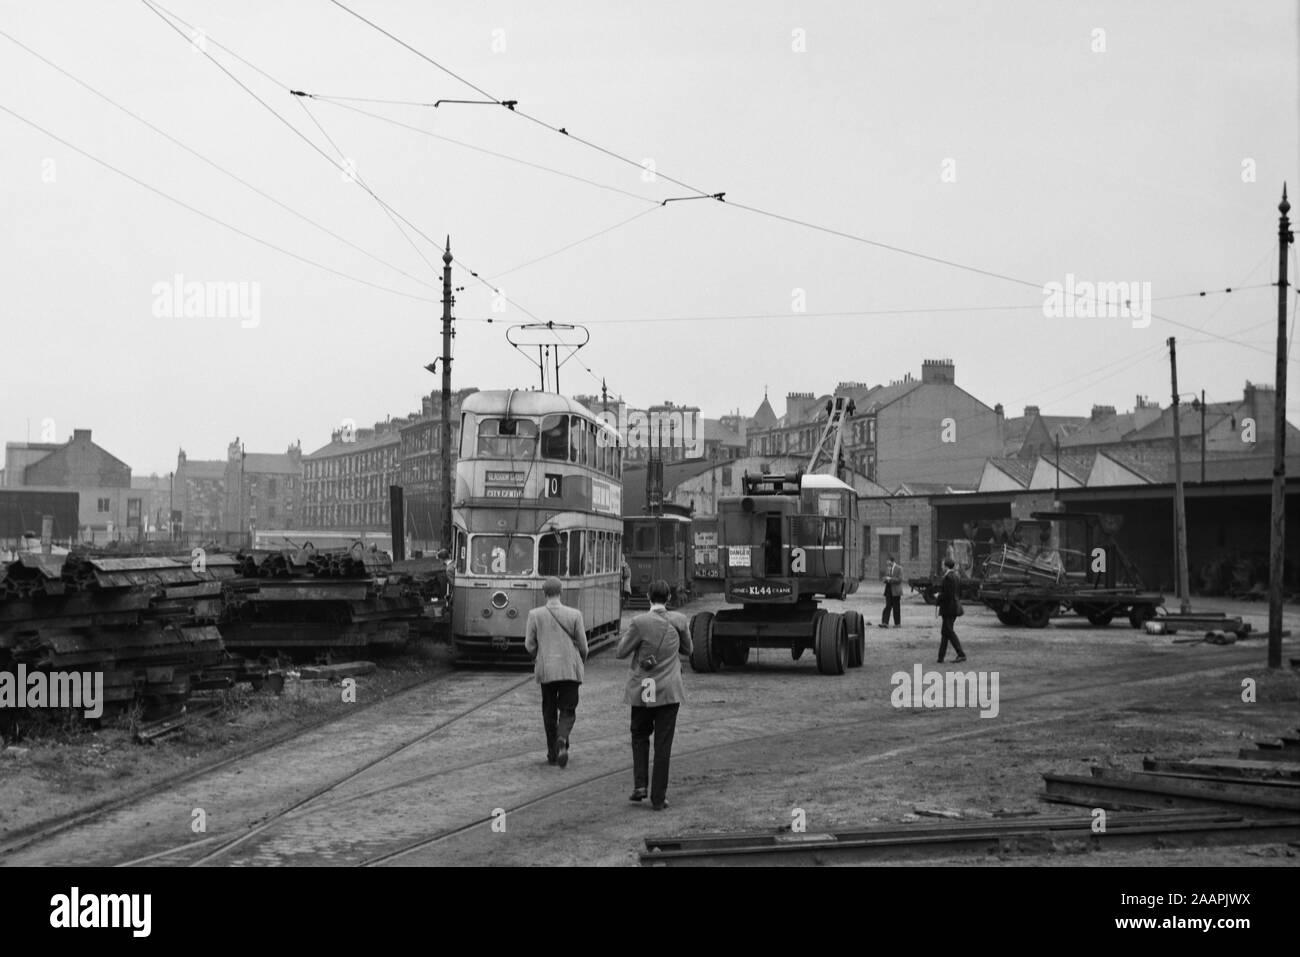 Glasgow Corporation Tramway tram no 1360 near the tram depot. Image taken before the closure of the tramlines which was in 1962 note the photographers that were on the scene to record and preserve the prosperity. Stock Photo